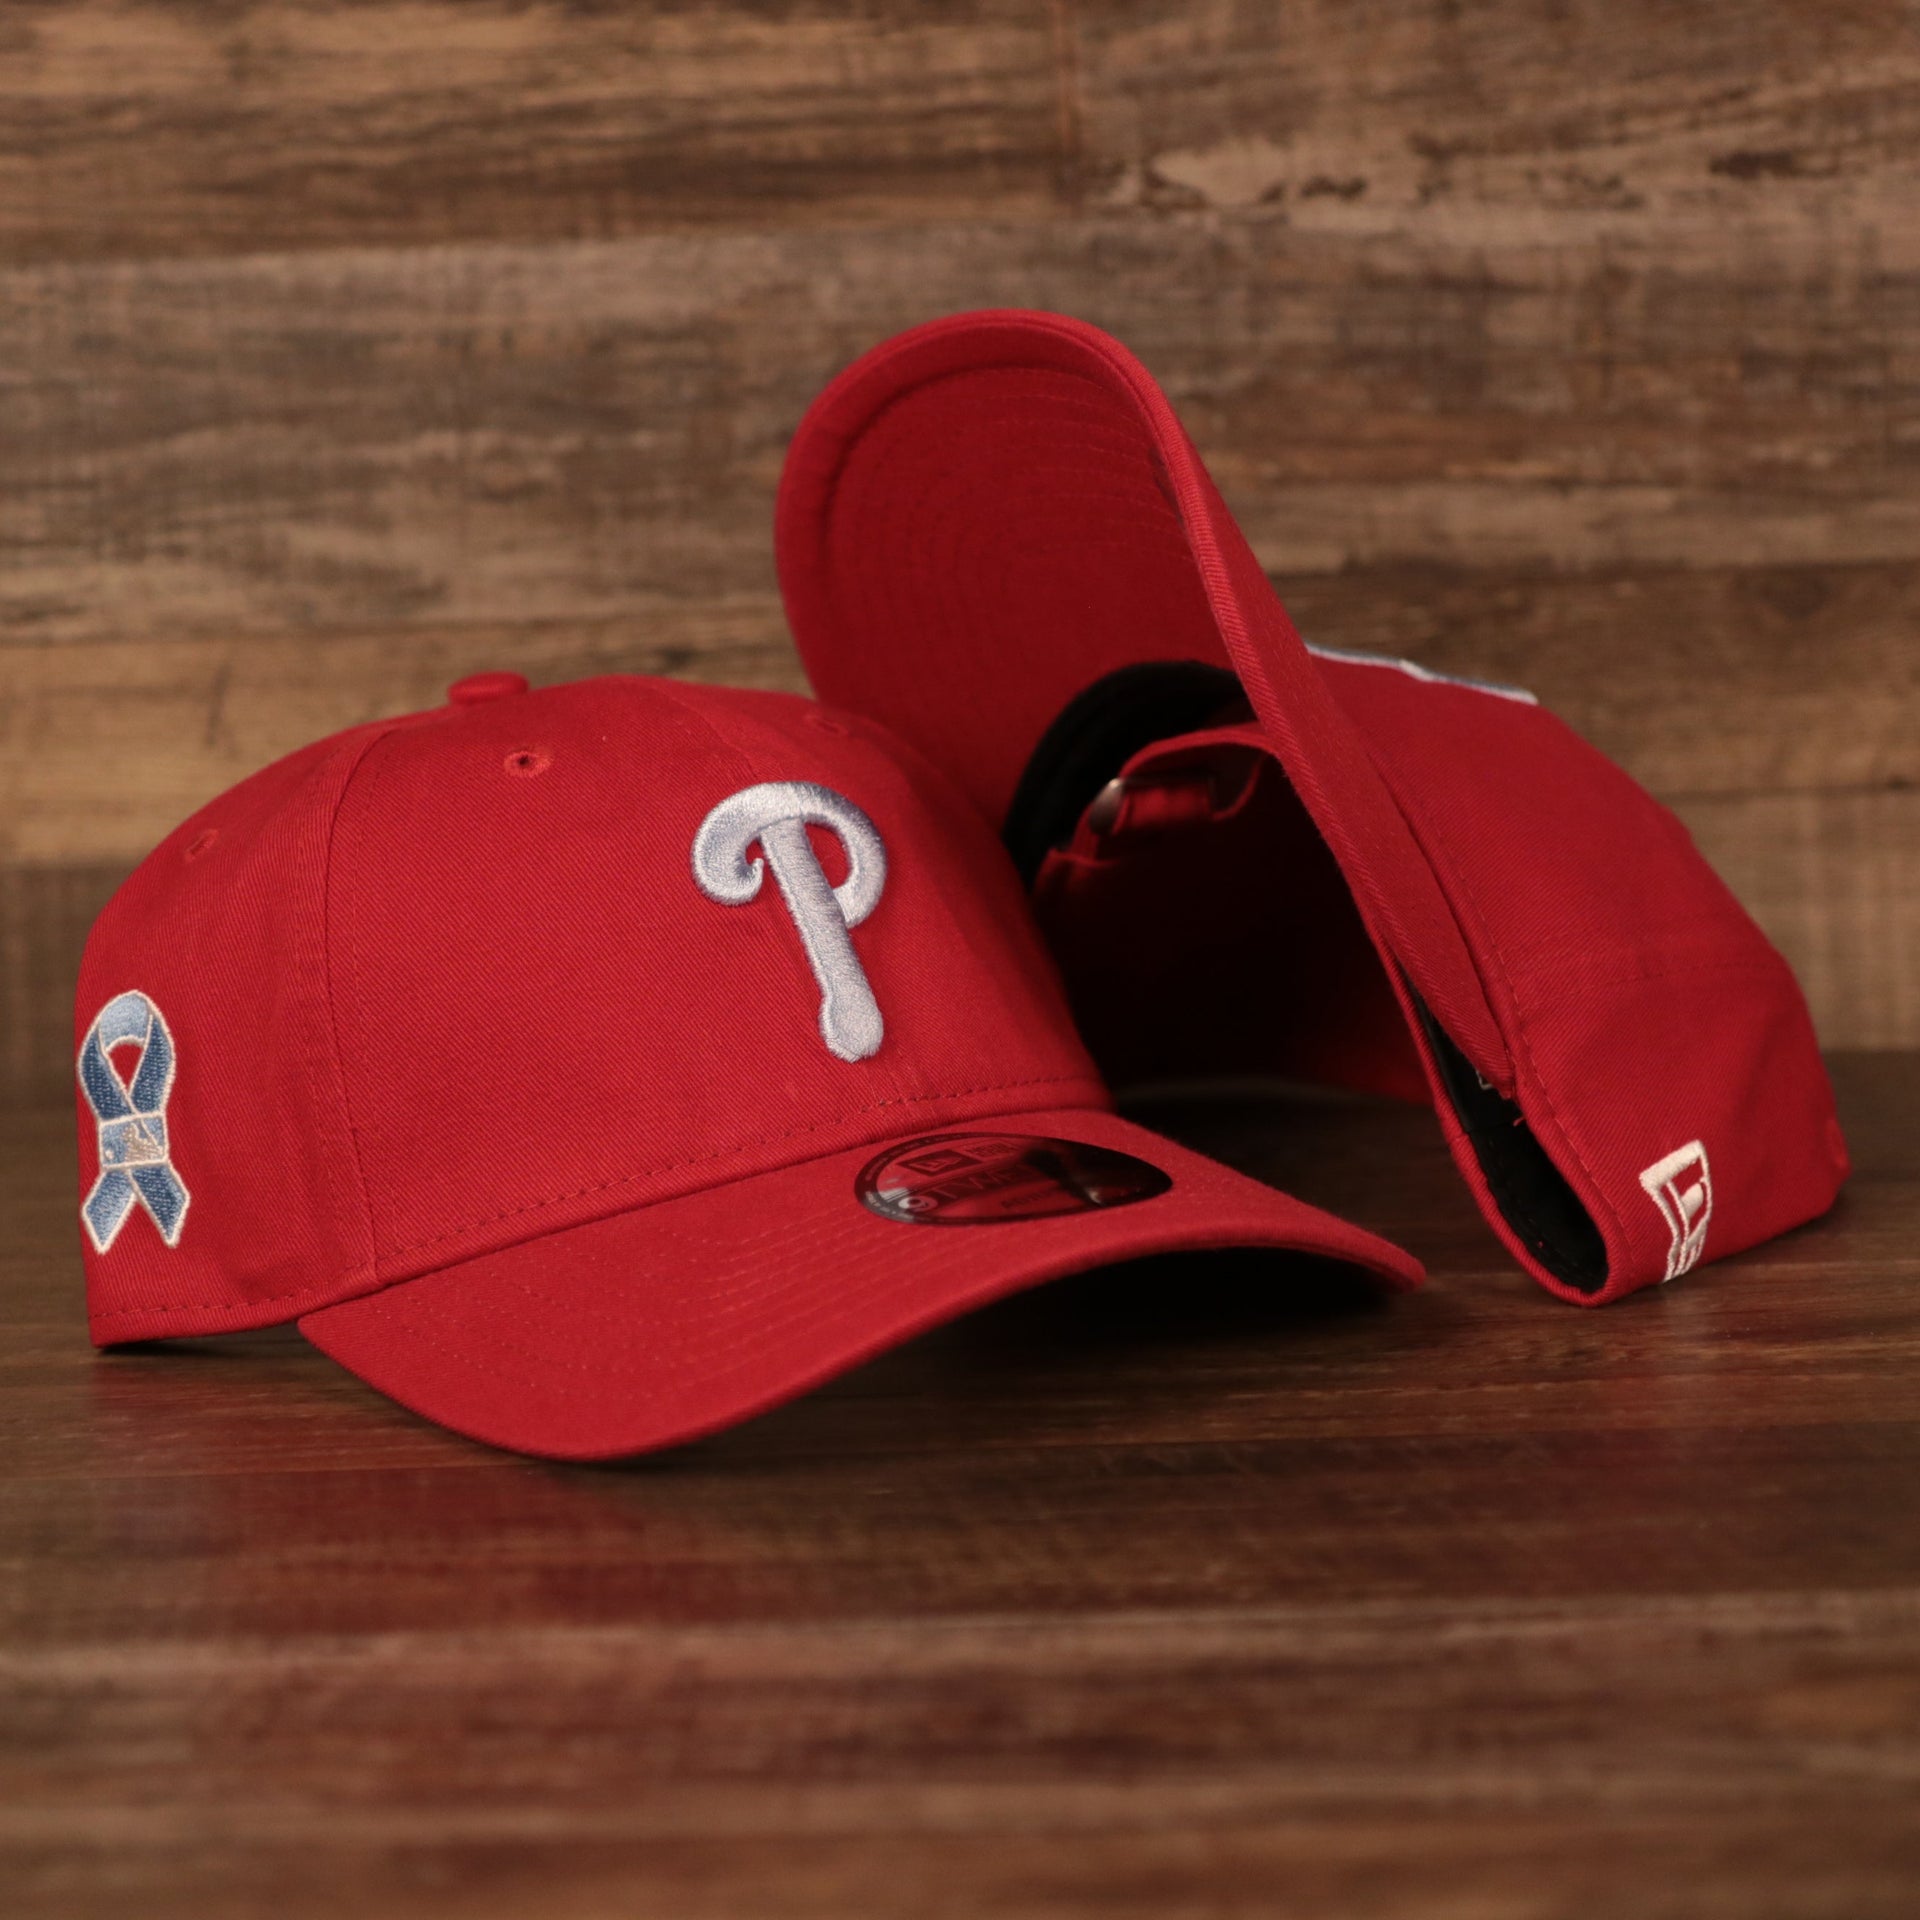 The Philadelphia Phillies red 9twenty 2021 MLB On Field Fathers Day hat by New Era.